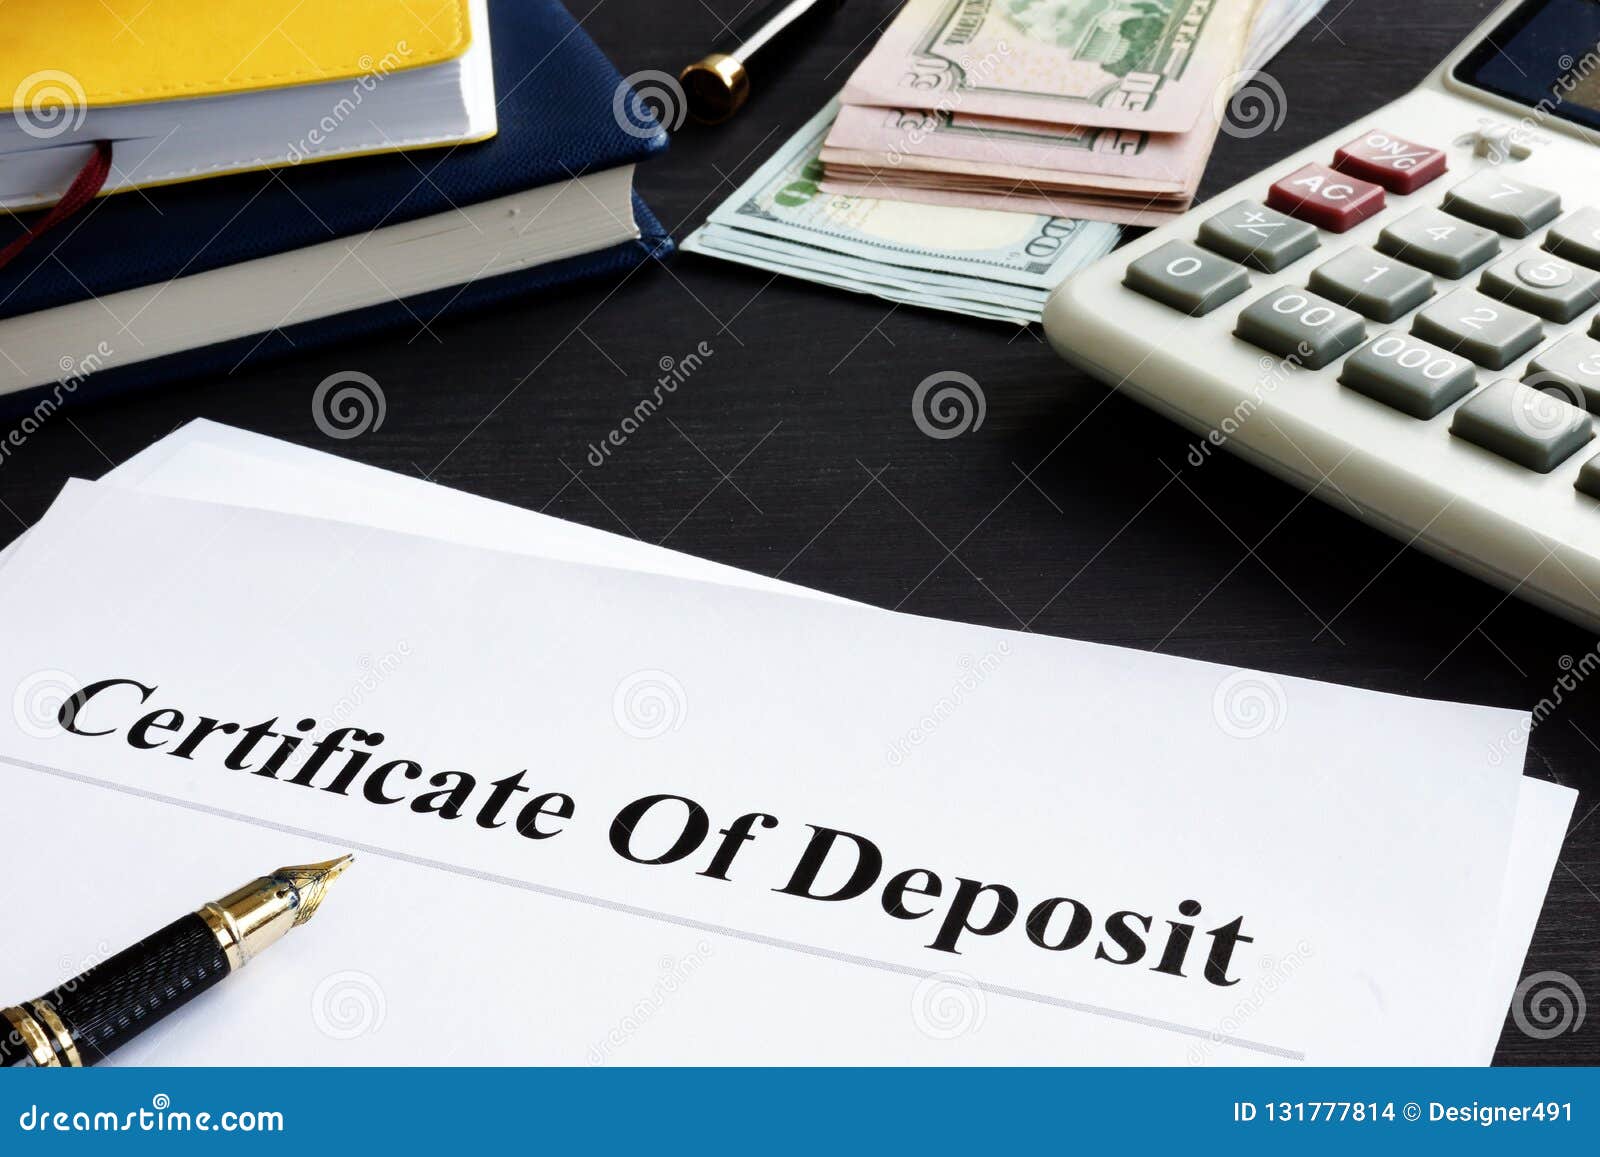 certificate of deposit and pen in the office